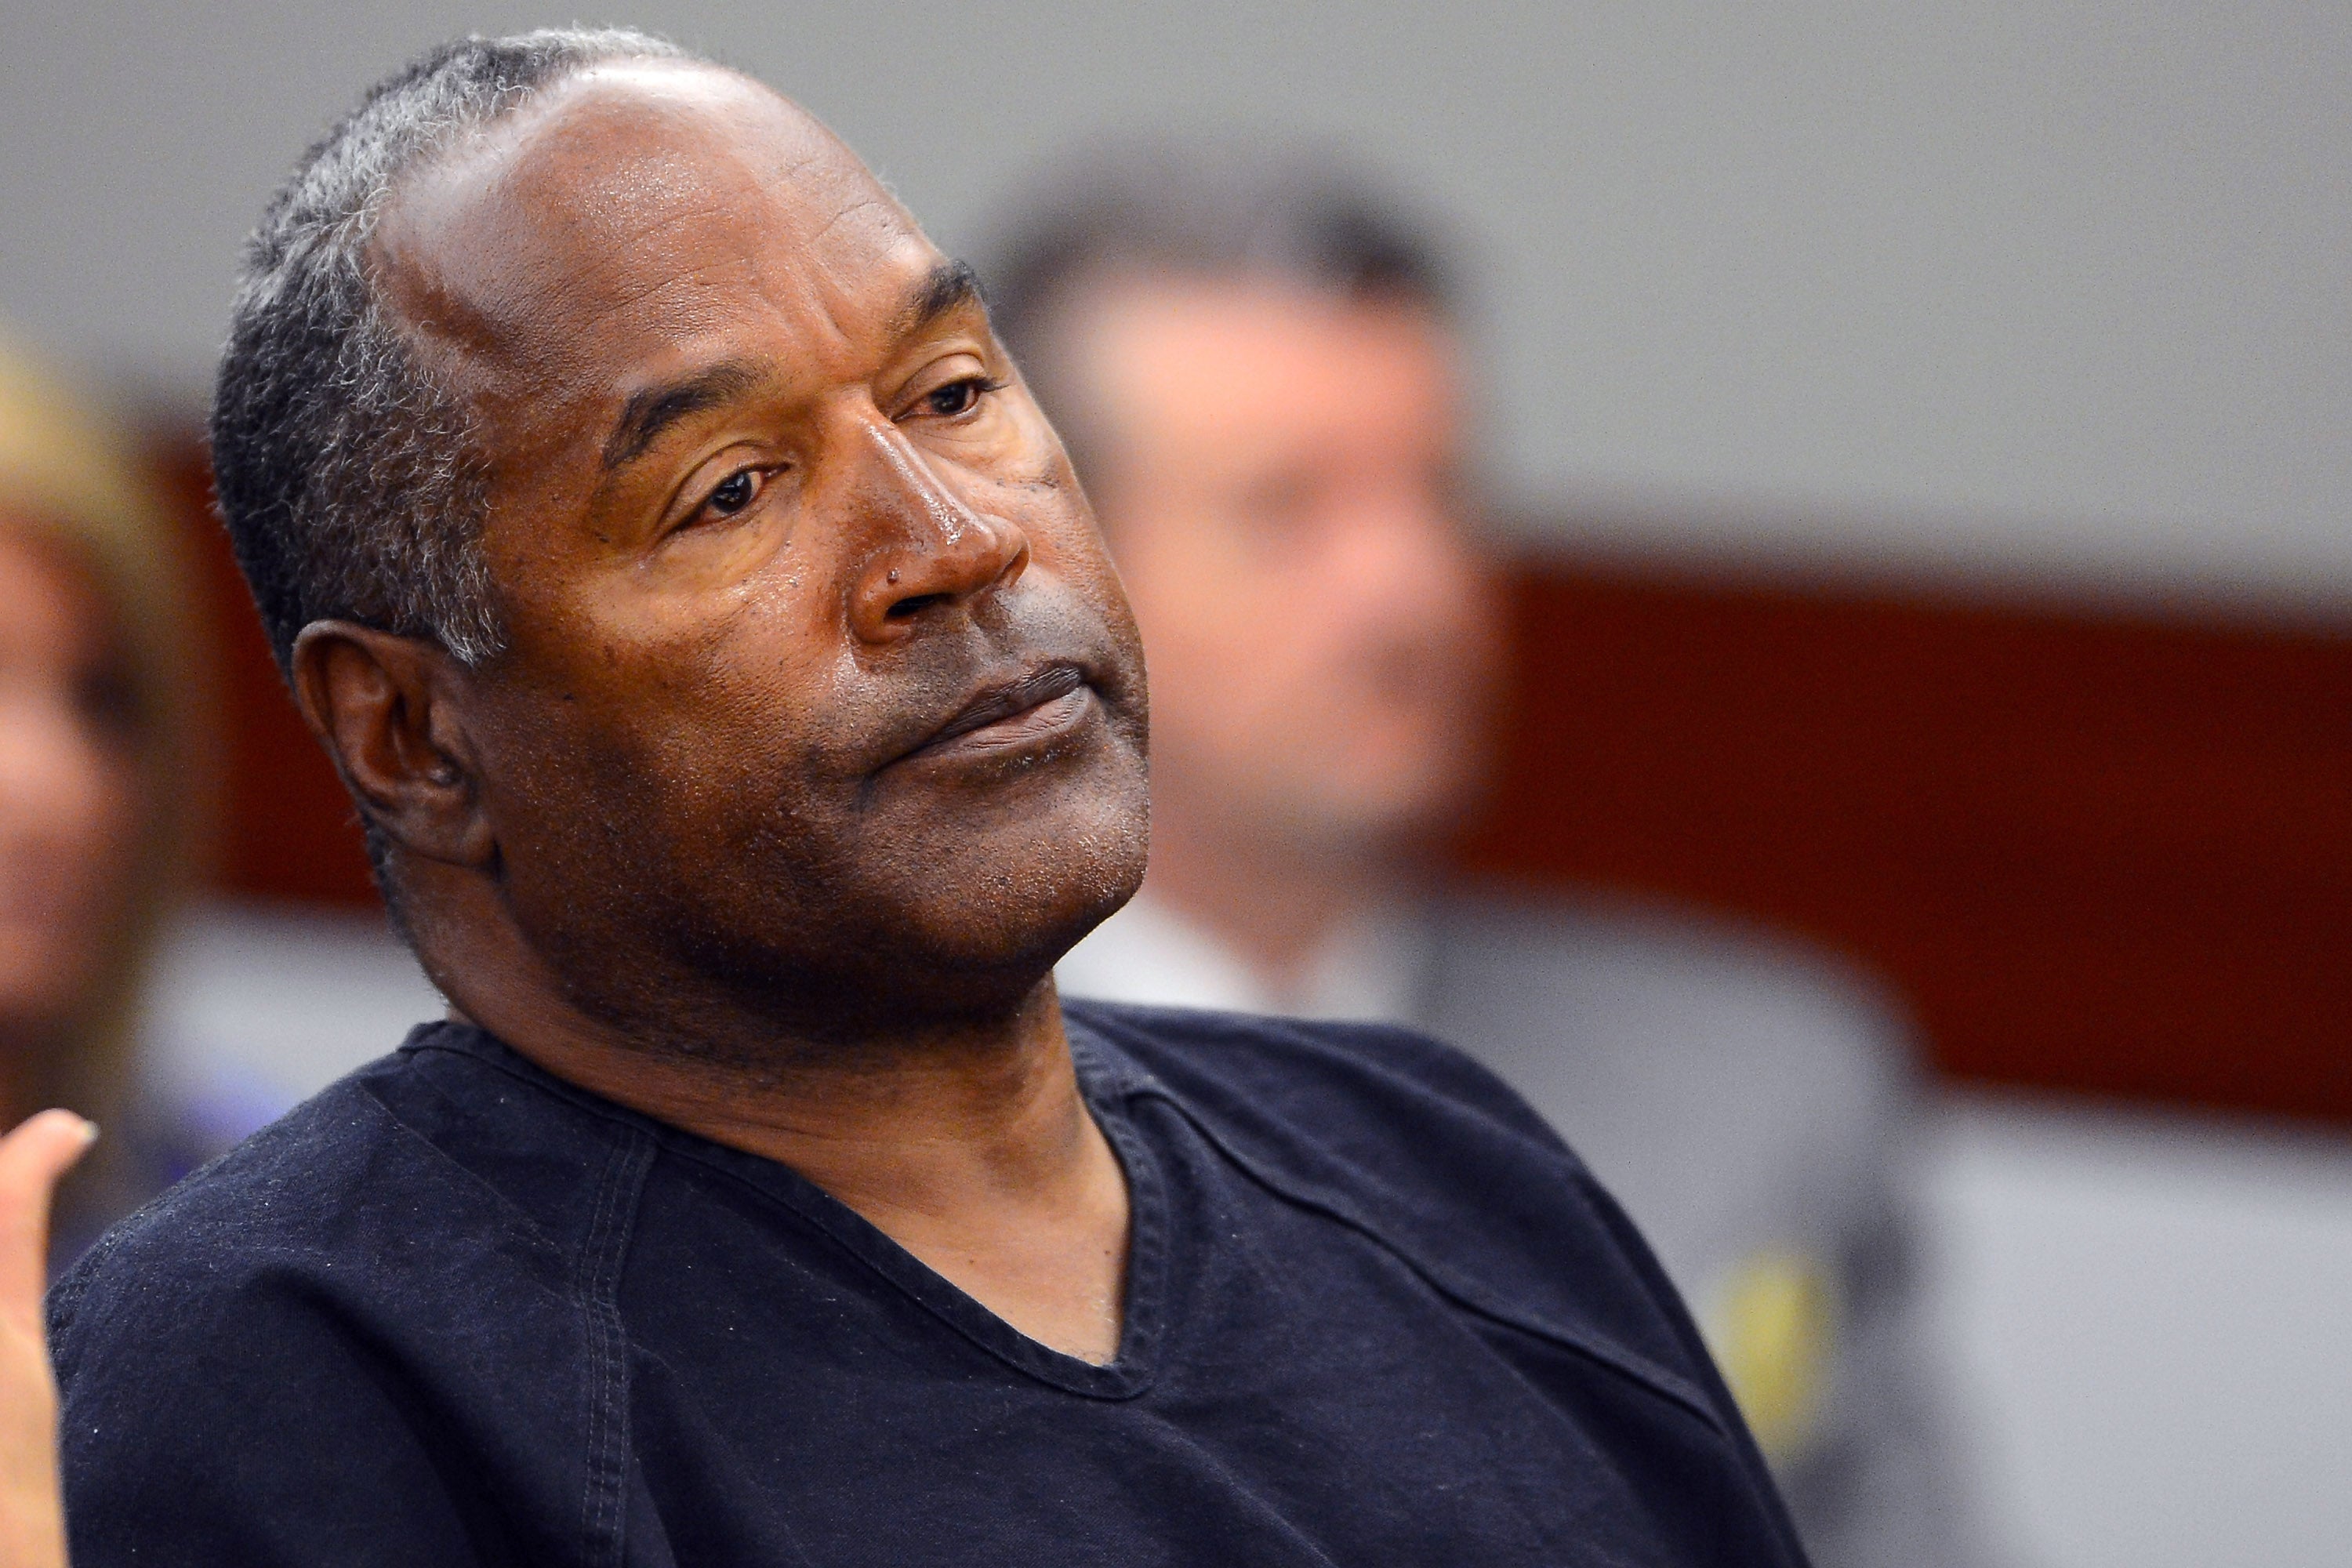 O.J. Simpson May Be Released From Prison As Early As October